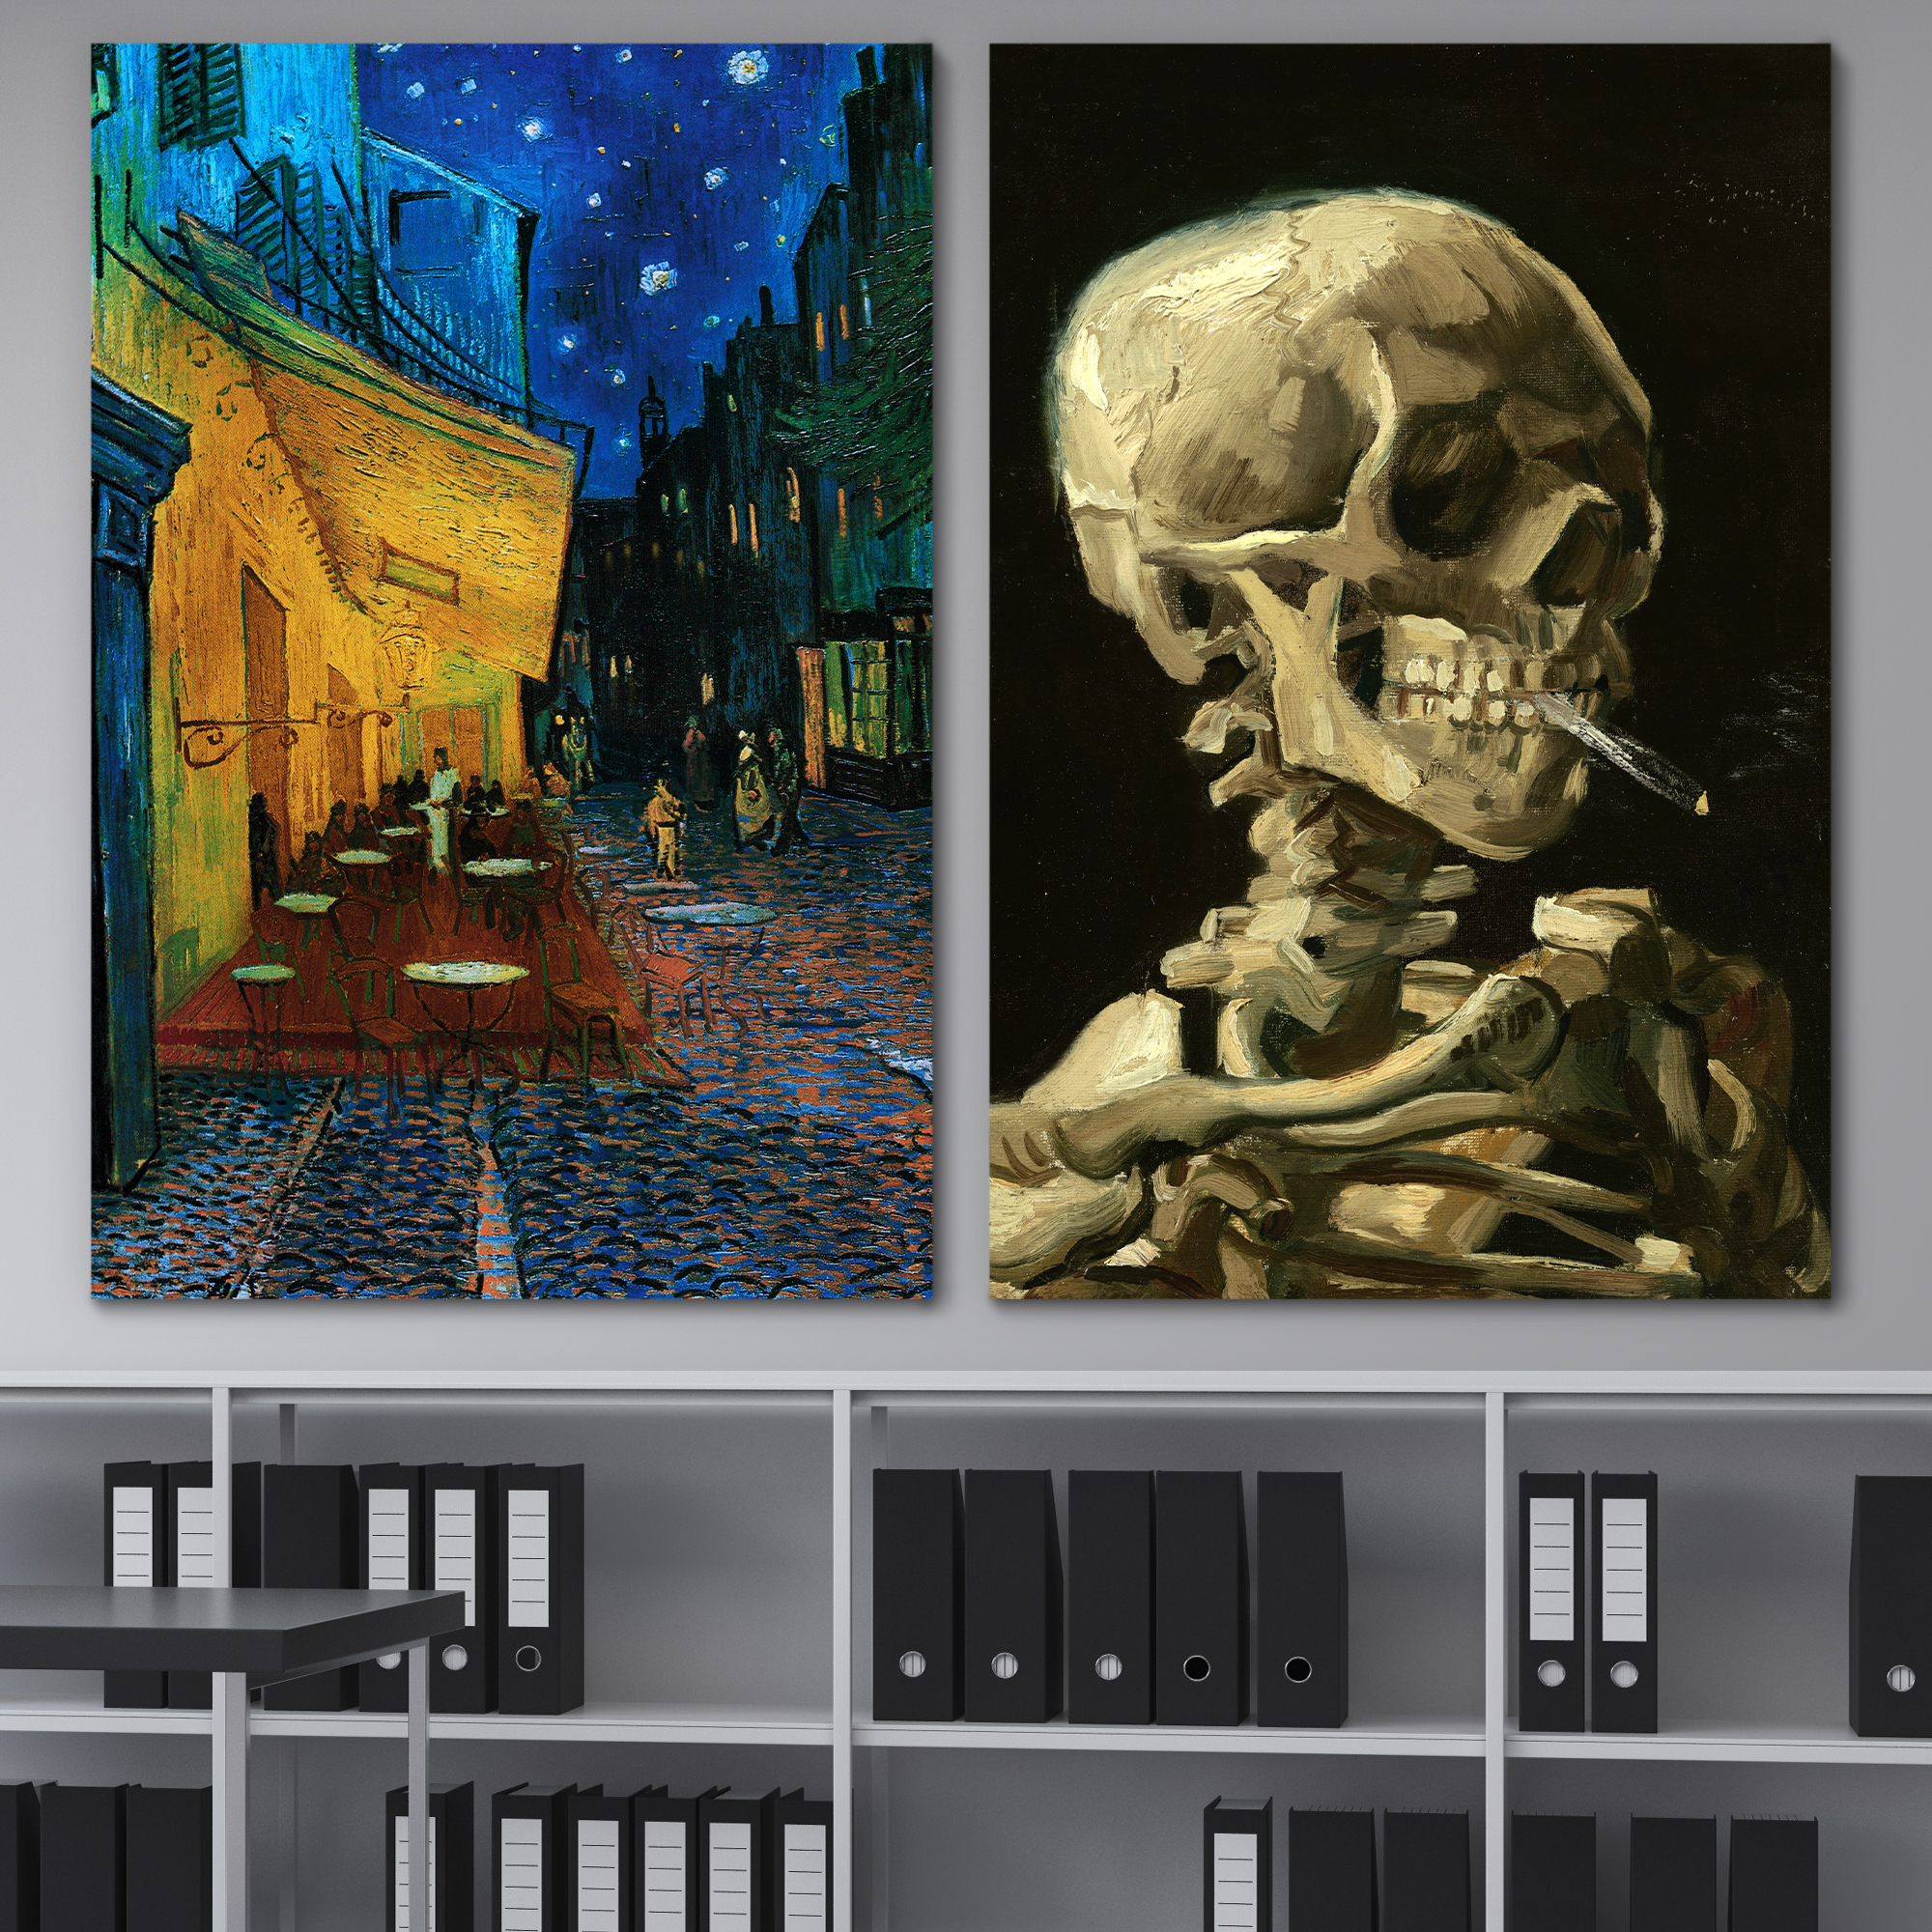 Cafe Terrace at Night/Skull of a Skeleton with Burning Cigarette by Vincent Van Gogh - Oil Painting Reproduction in Set of 2 | Canvas Prints Wall Art, Ready to Hang - 16